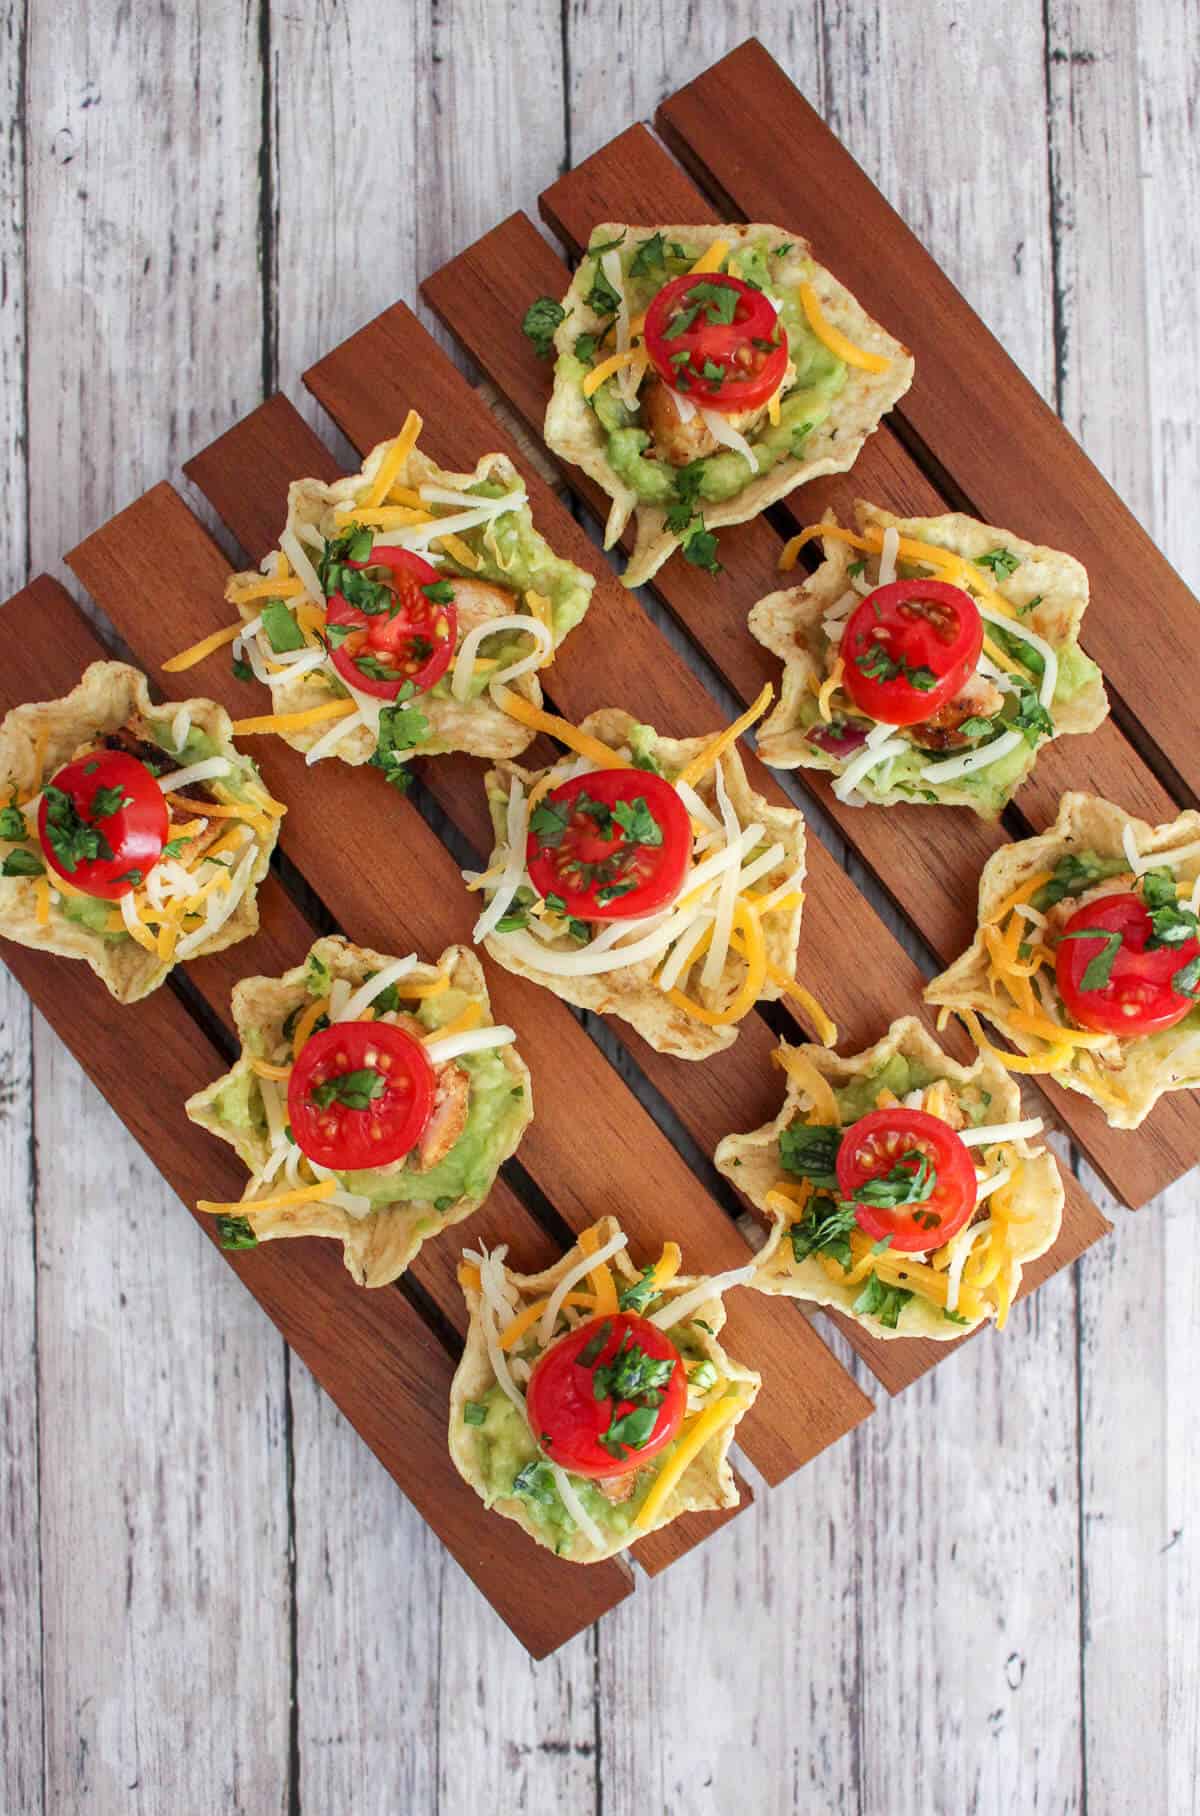 tostito 'scoop' tortilla chips filled with chicken, guacamole, cheese and tomato